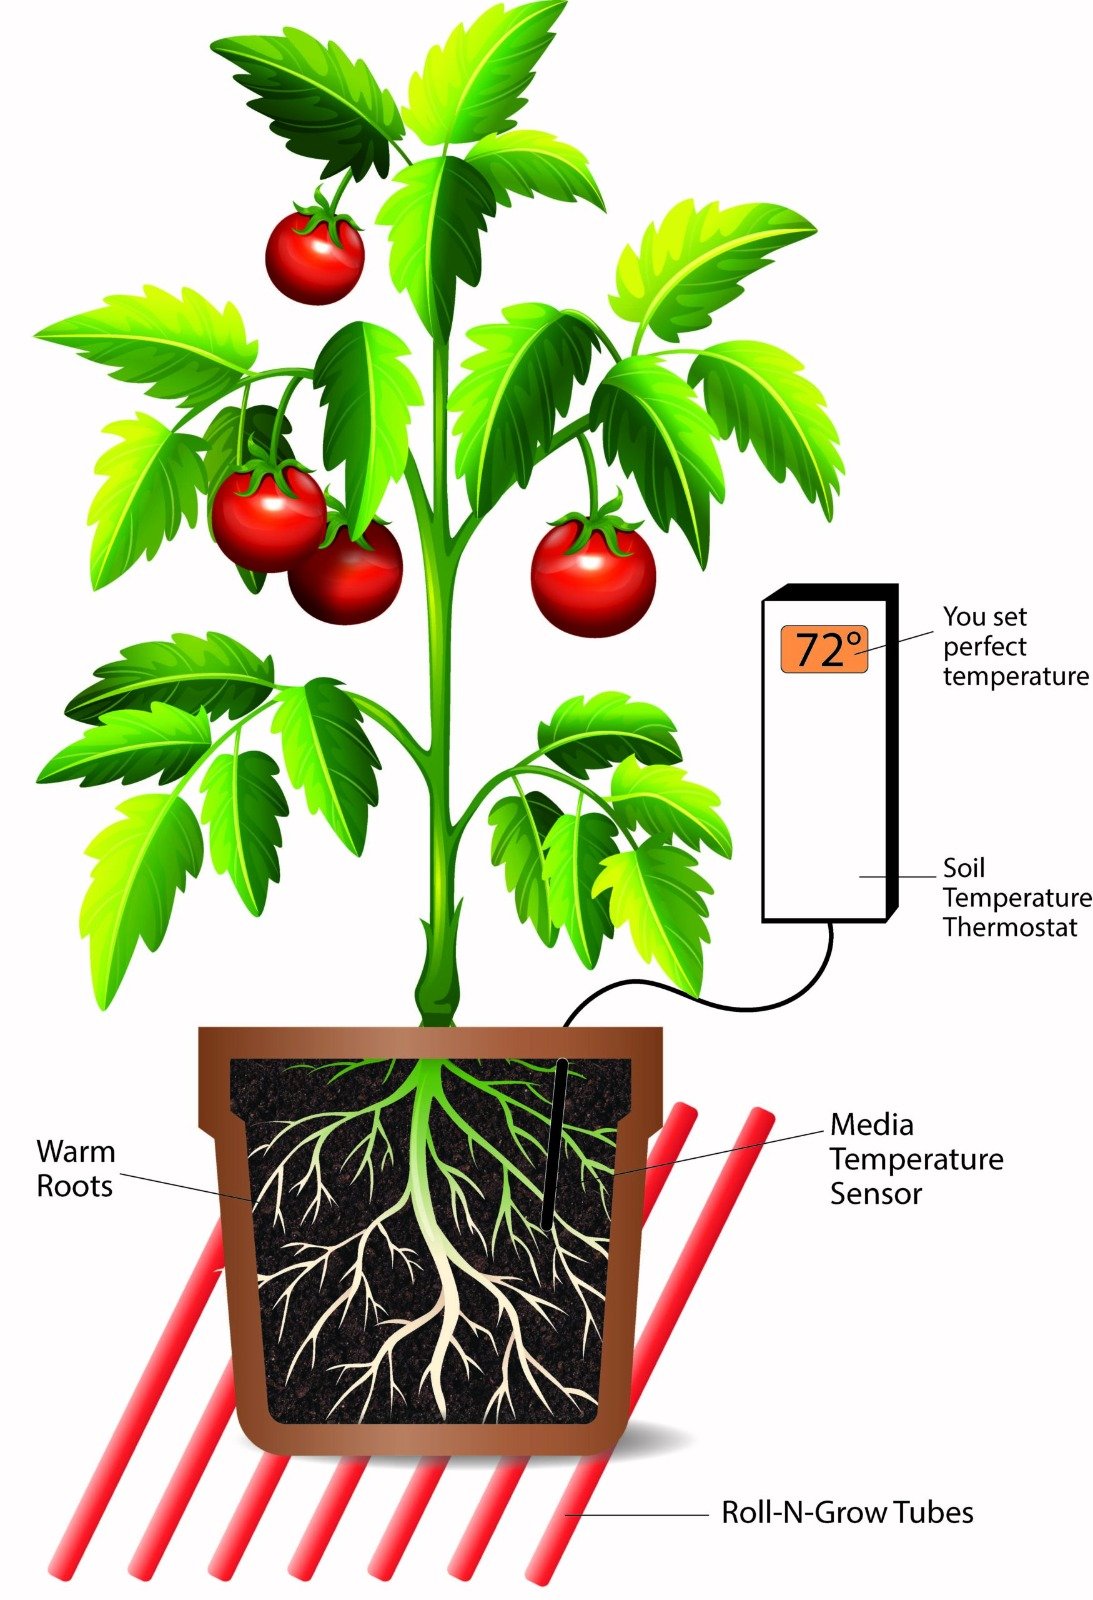 Illustration of tomato plant shownig roots diagraming how to use the Roll and grow mat. Pot placed on the the Roll'n Grow Tubes to warm roots to the perfect temperature of users choice, measured using a soil temperature thermostat with the sensor placed in the soil